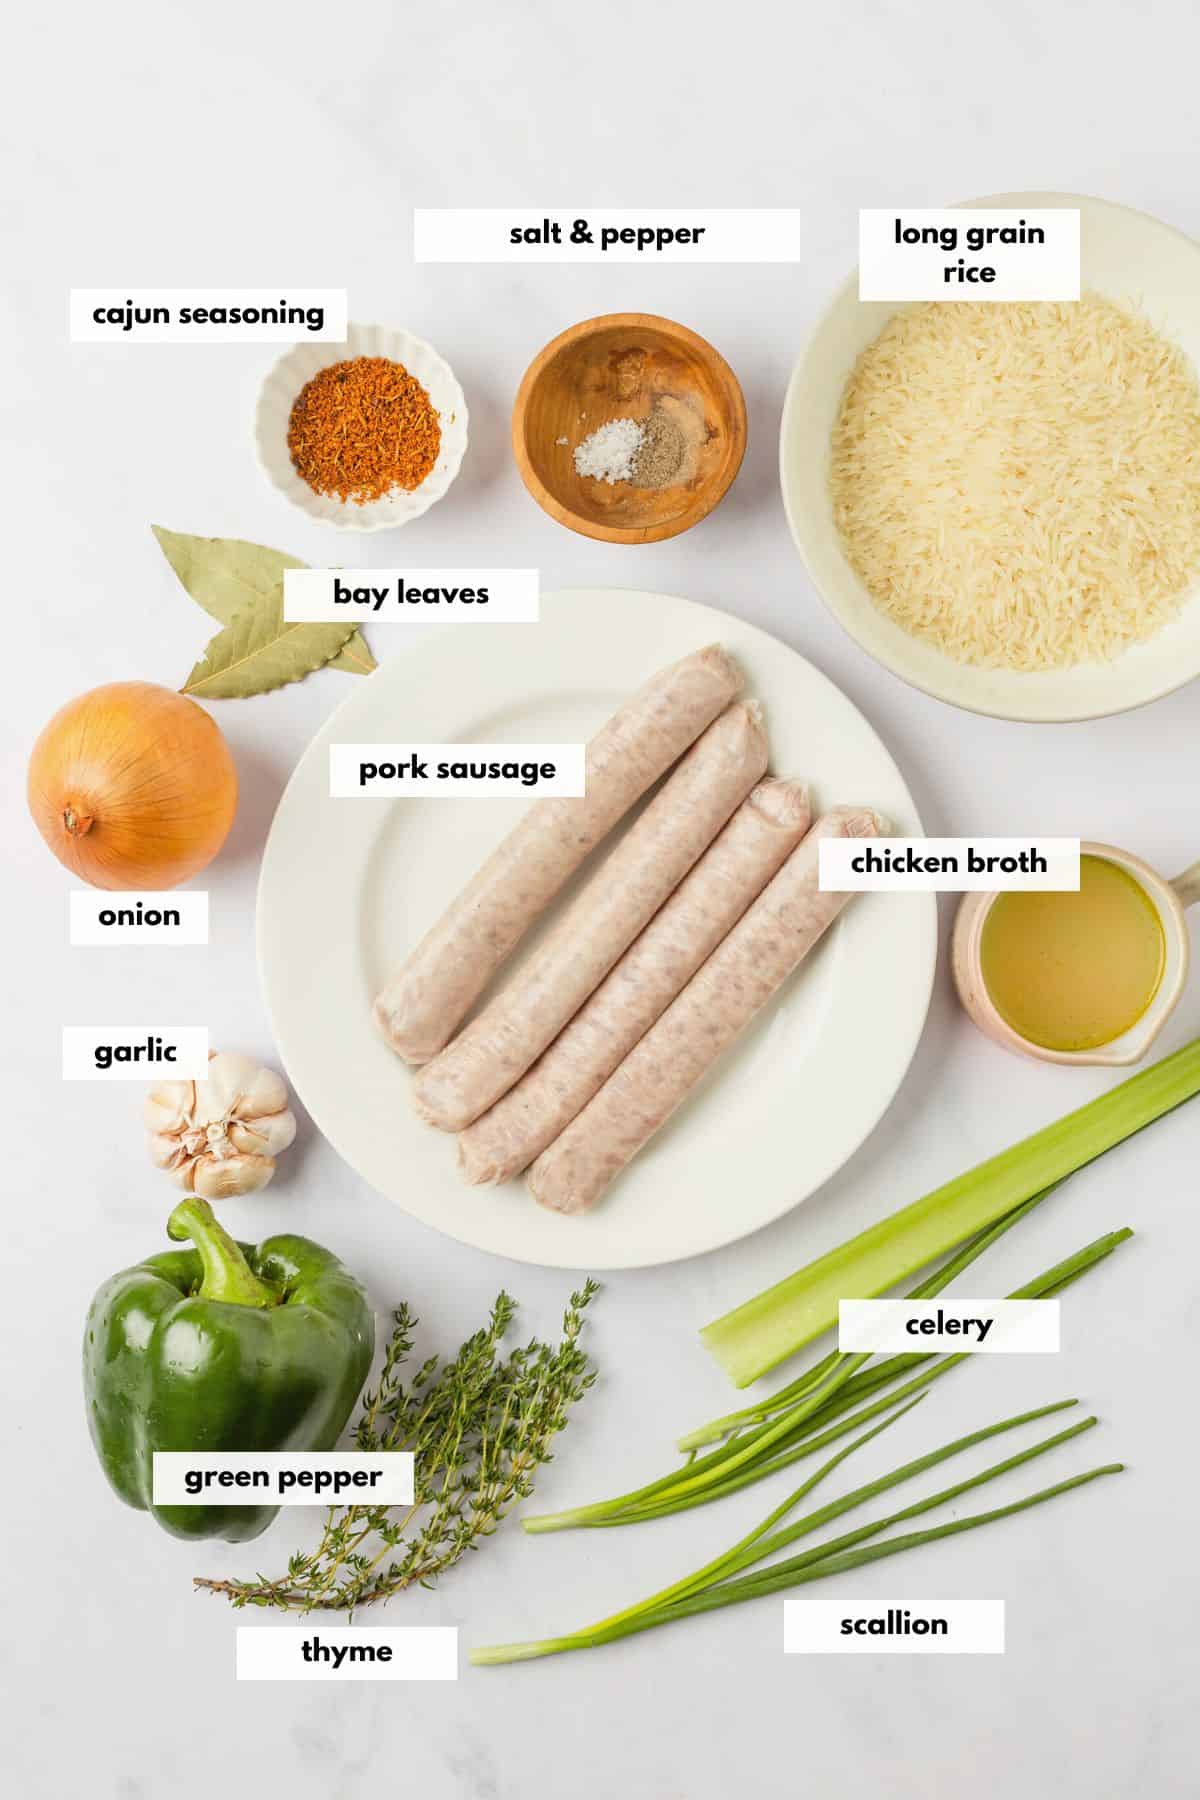 Ingredients to make Cajun dirty rice with sausage including pork sausage, green peppers, onion, garlic, cajun seasoning, long grain white rice, thyme, broth and scallions.